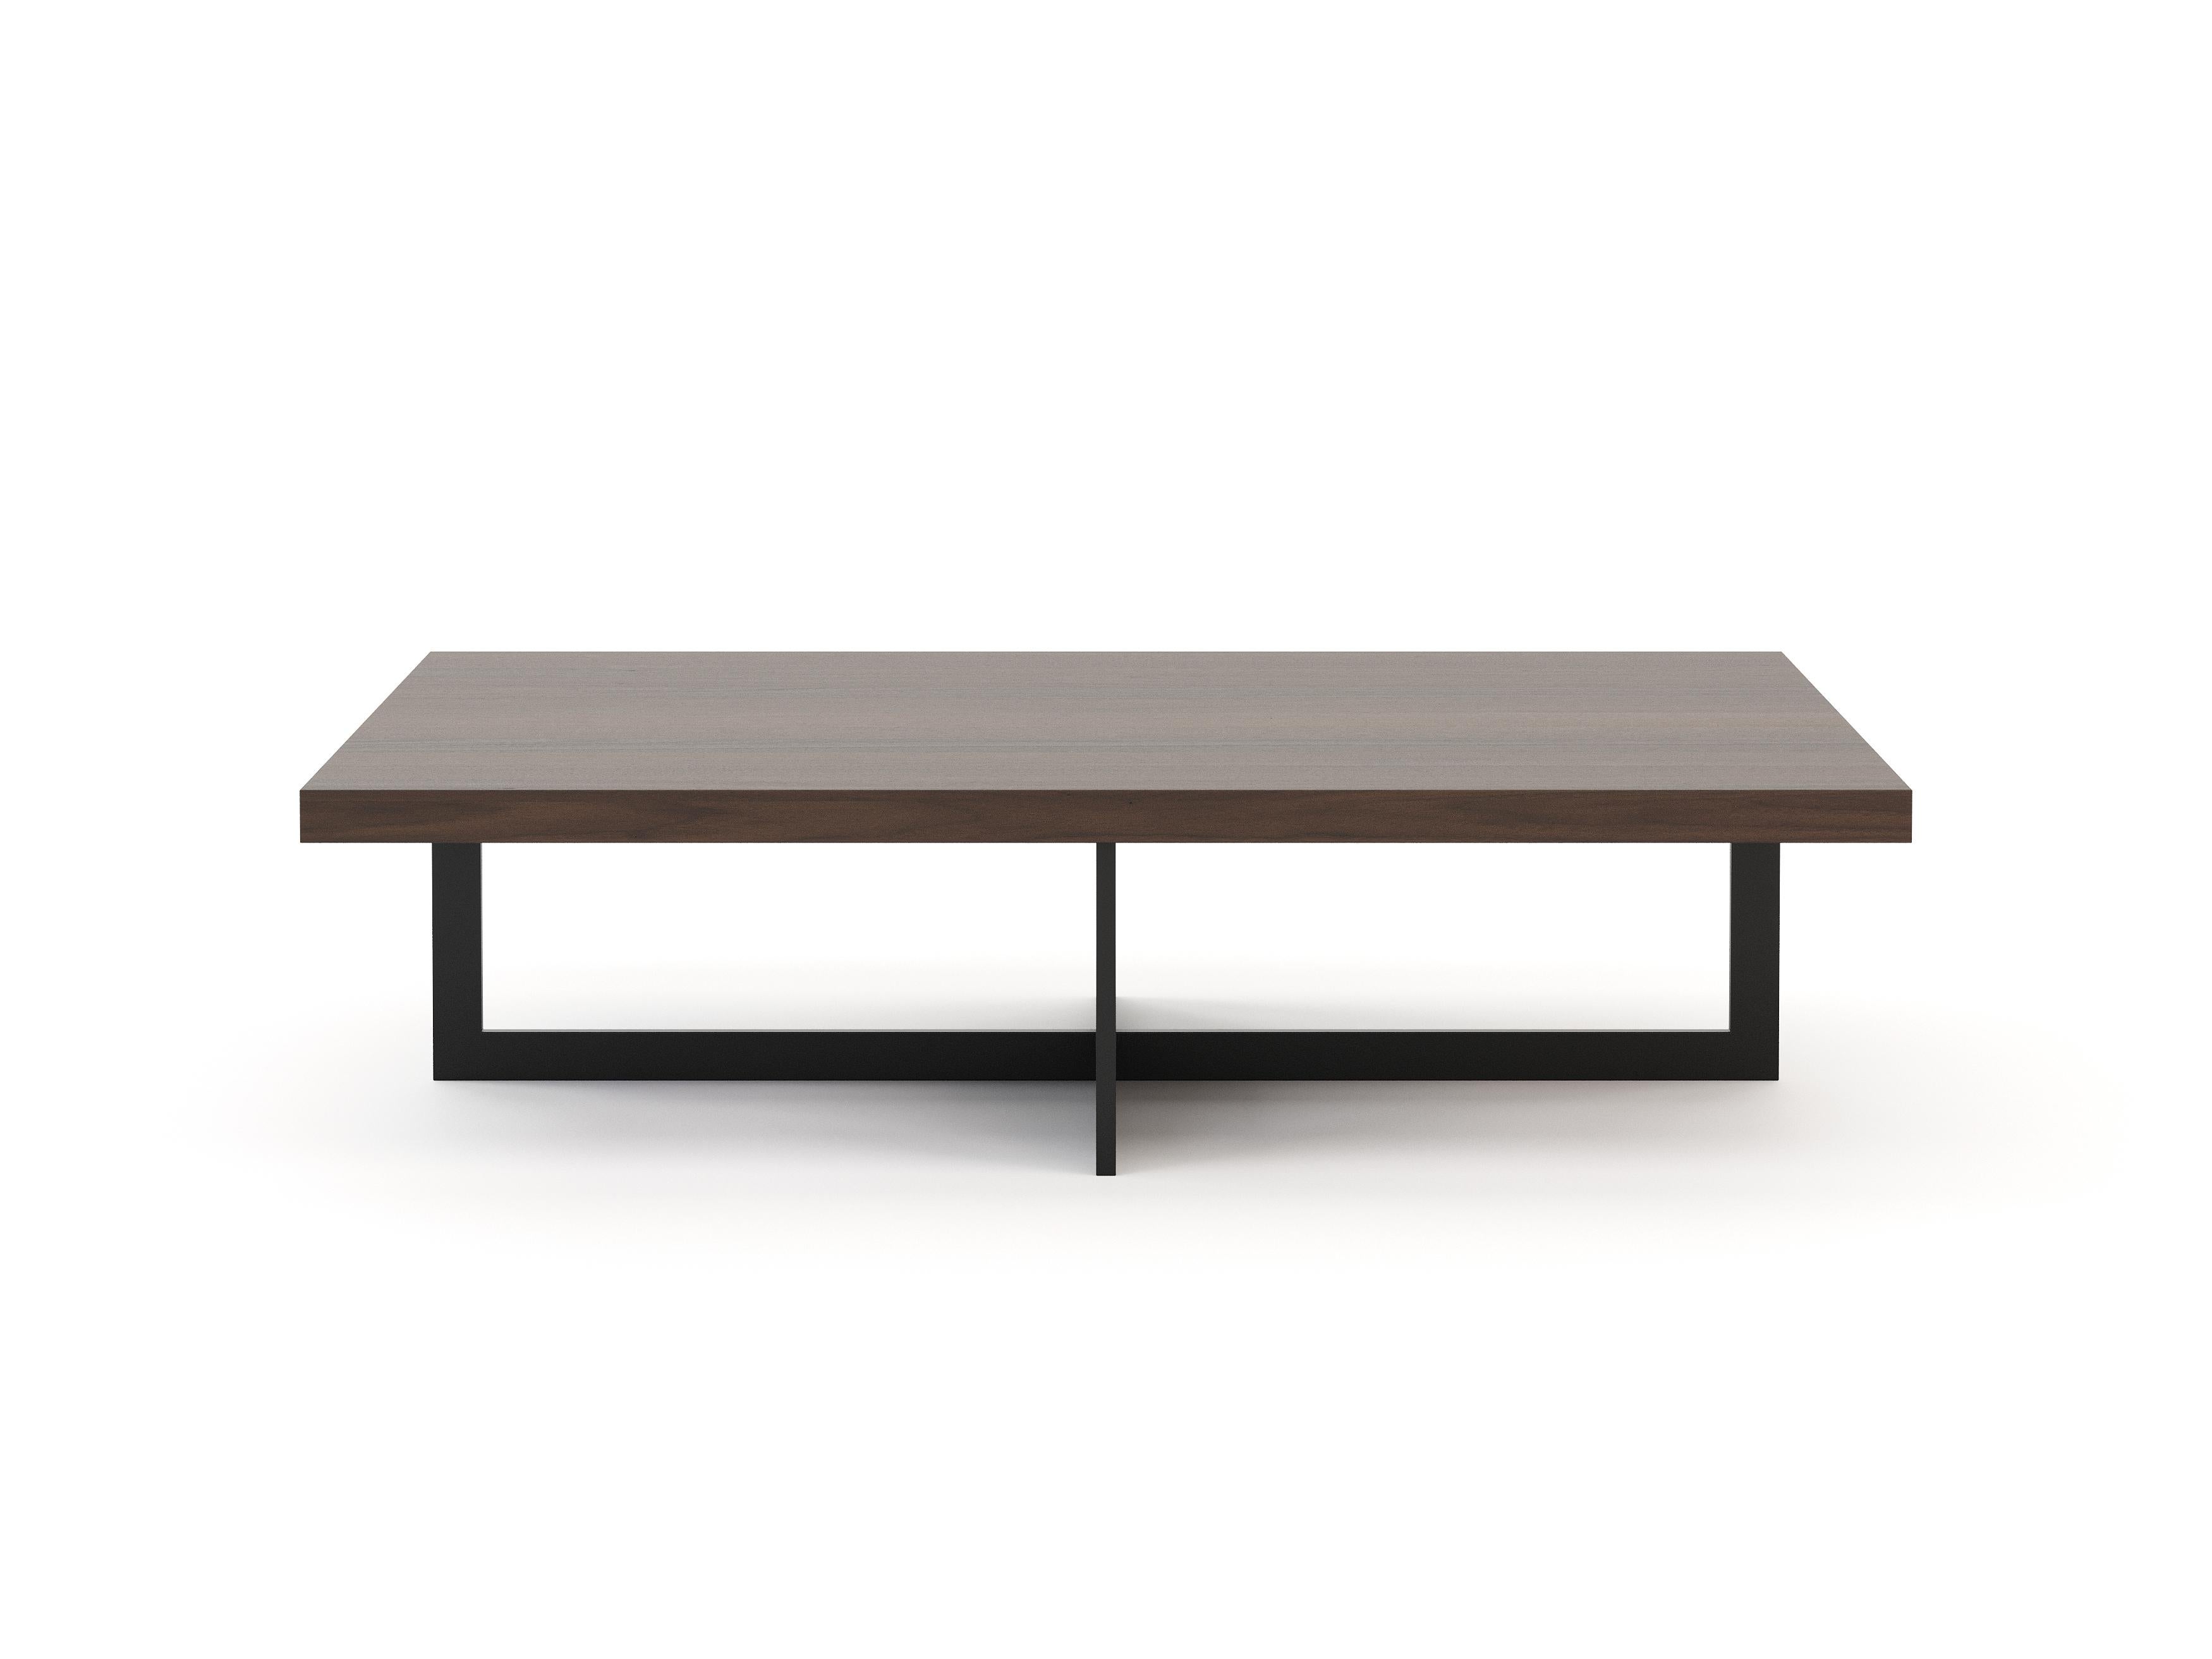 The Slender collection was developed with slim and elongated lines. The traces of this collection extend along the pieces, creating a sense of involvement between all the elements.

With a sleek base in textured black iron, the Slender coffee table